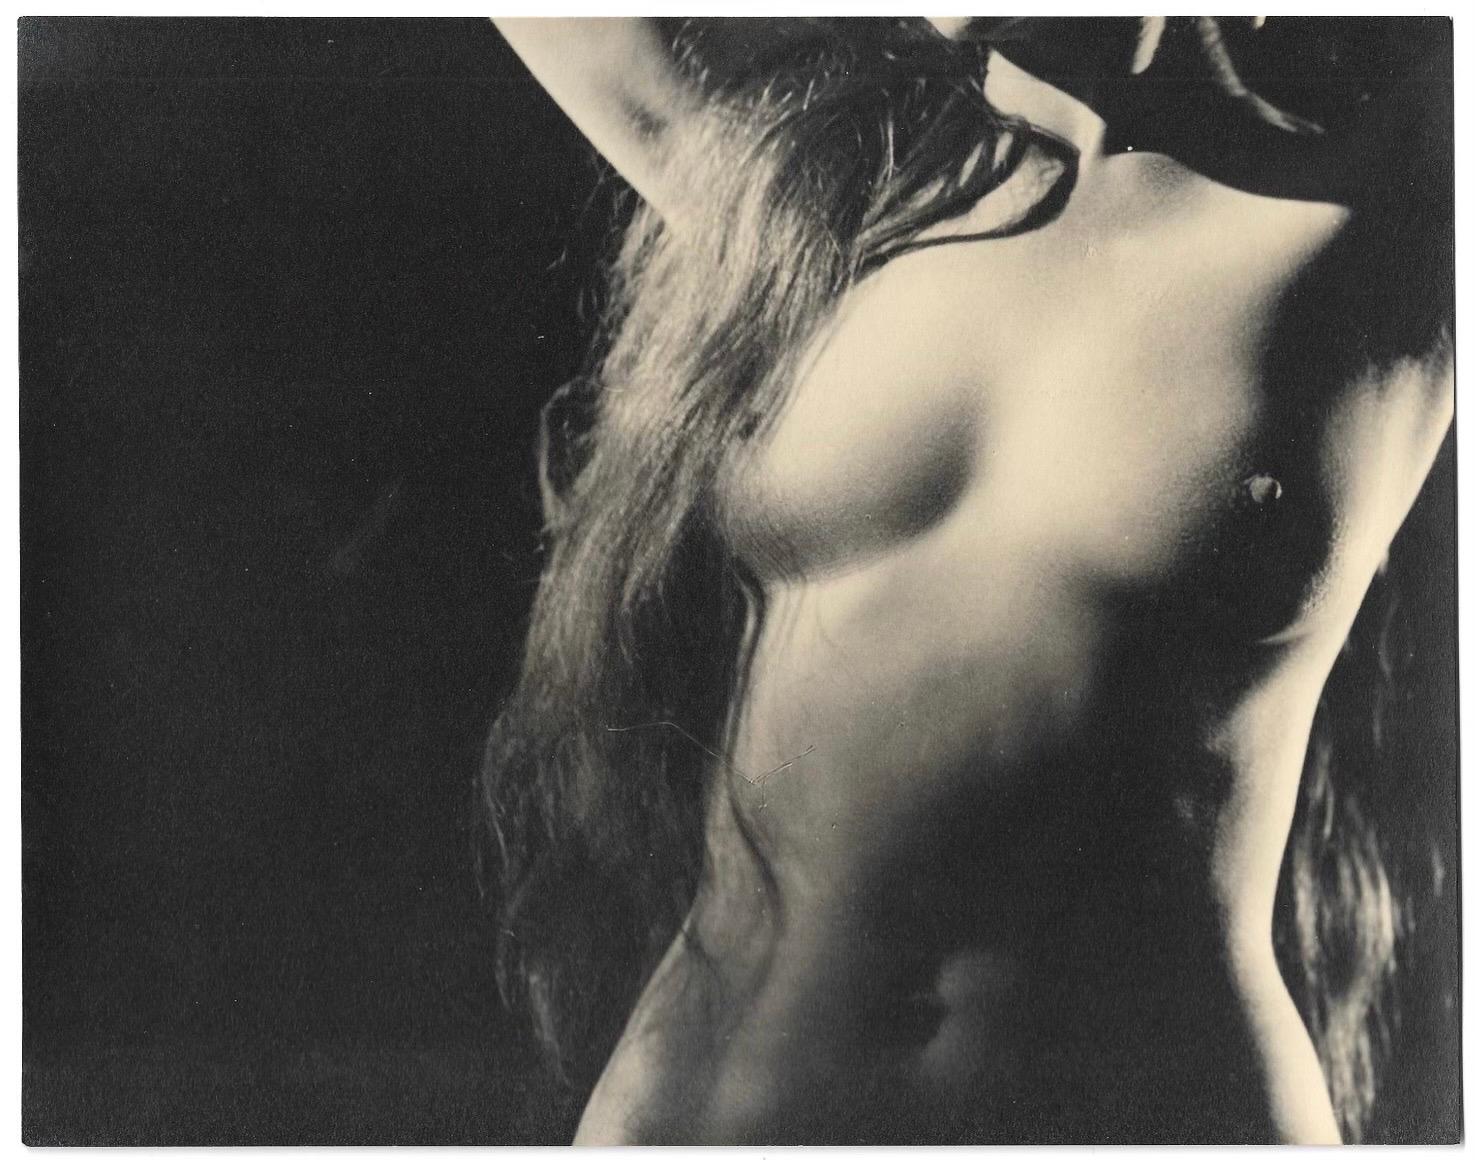 Dan O'Neill Nude Photograph - Black & White Photograph of a Female Nude by Contemporary American Photographer